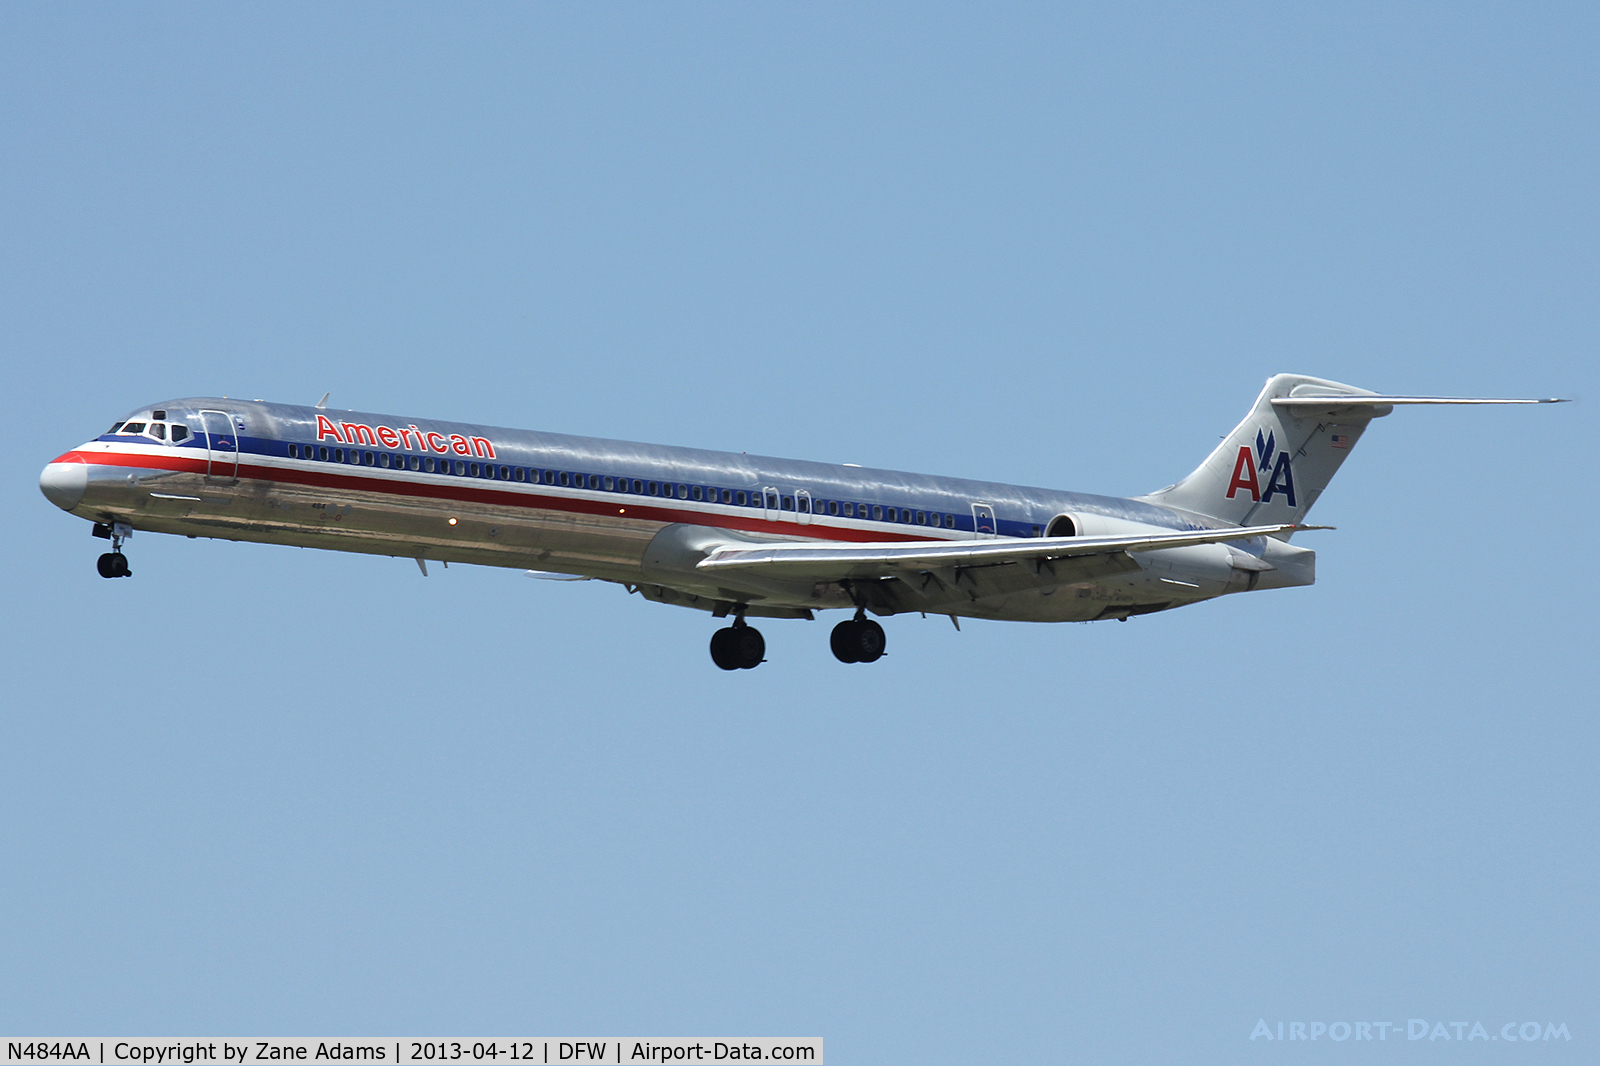 N484AA, 1988 McDonnell Douglas MD-82 (DC-9-82) C/N 49677, American Airlines landing at DFW Airport.